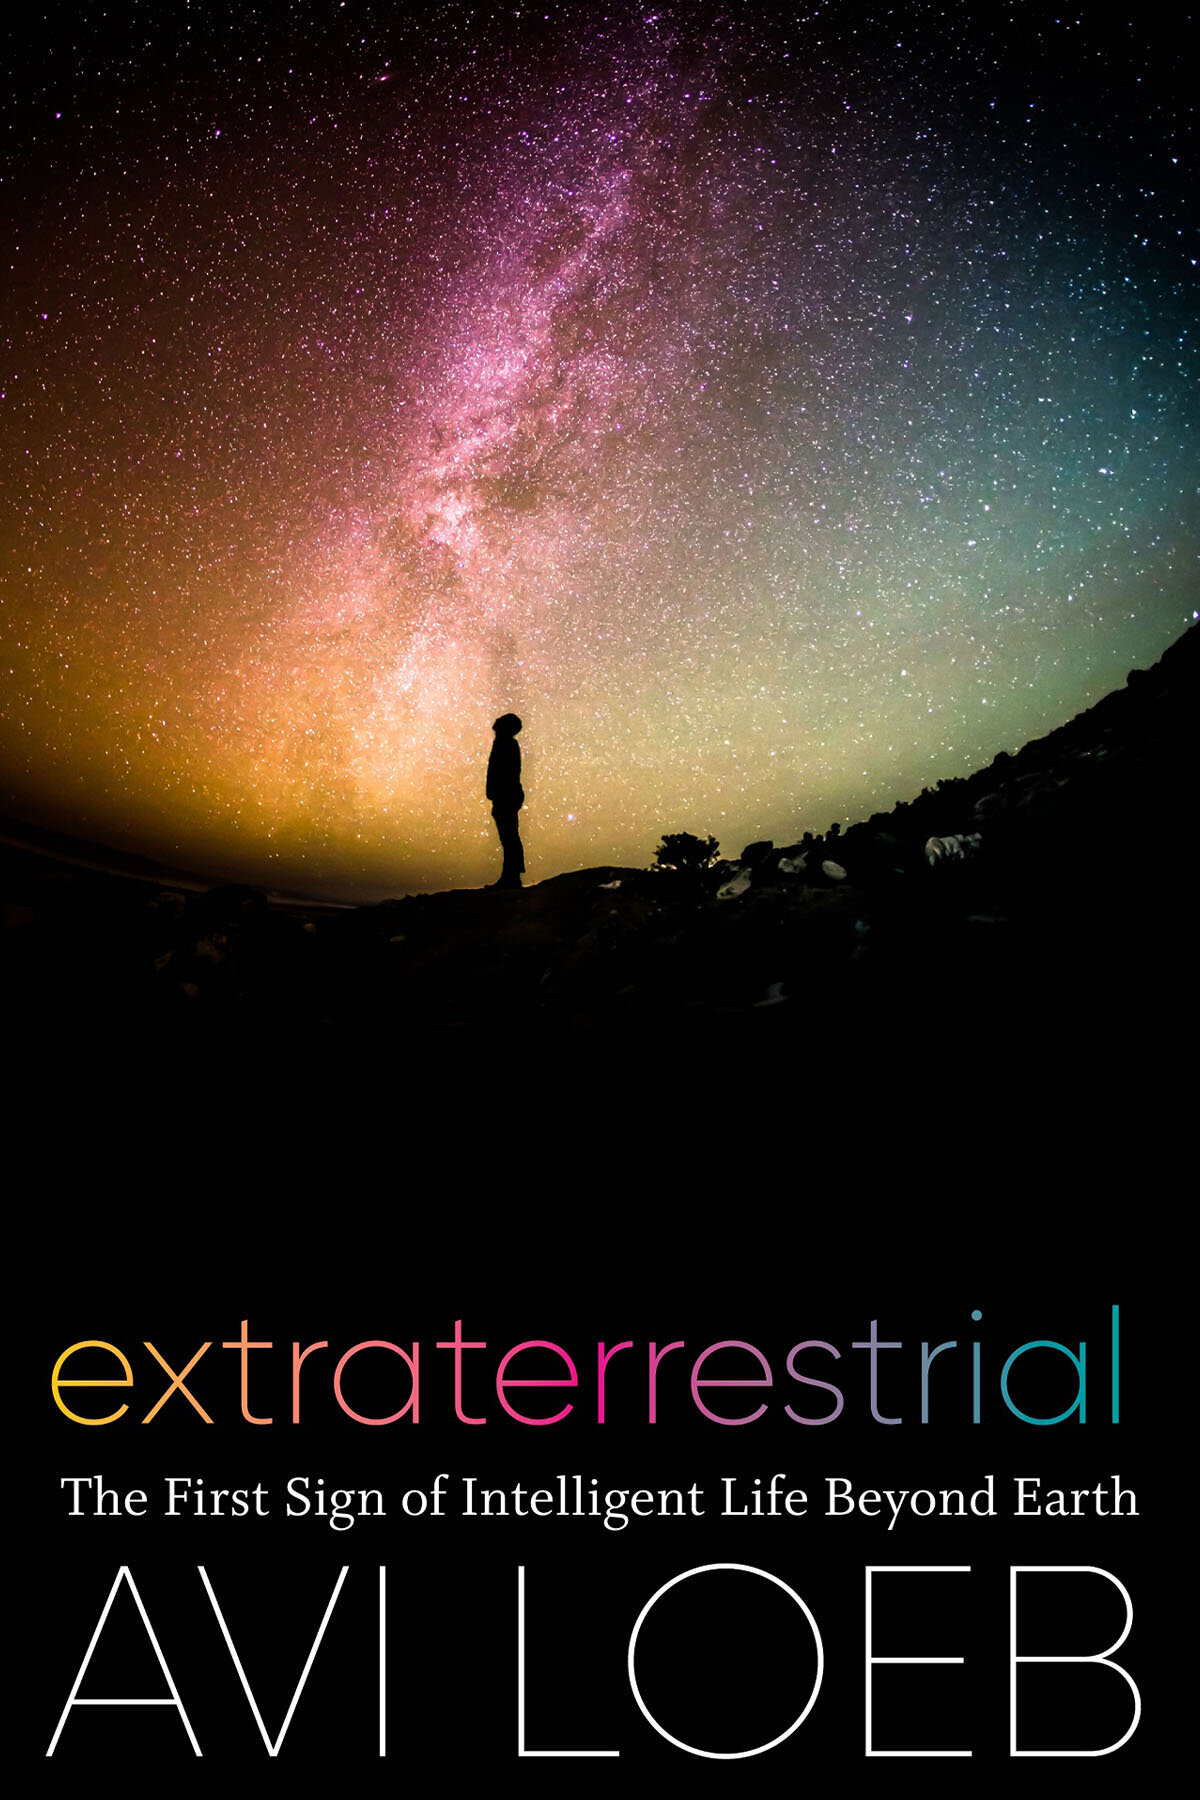 Extraterrestrial: The First Sign of Intelligent Life Beyond Earth by Avi Loeb